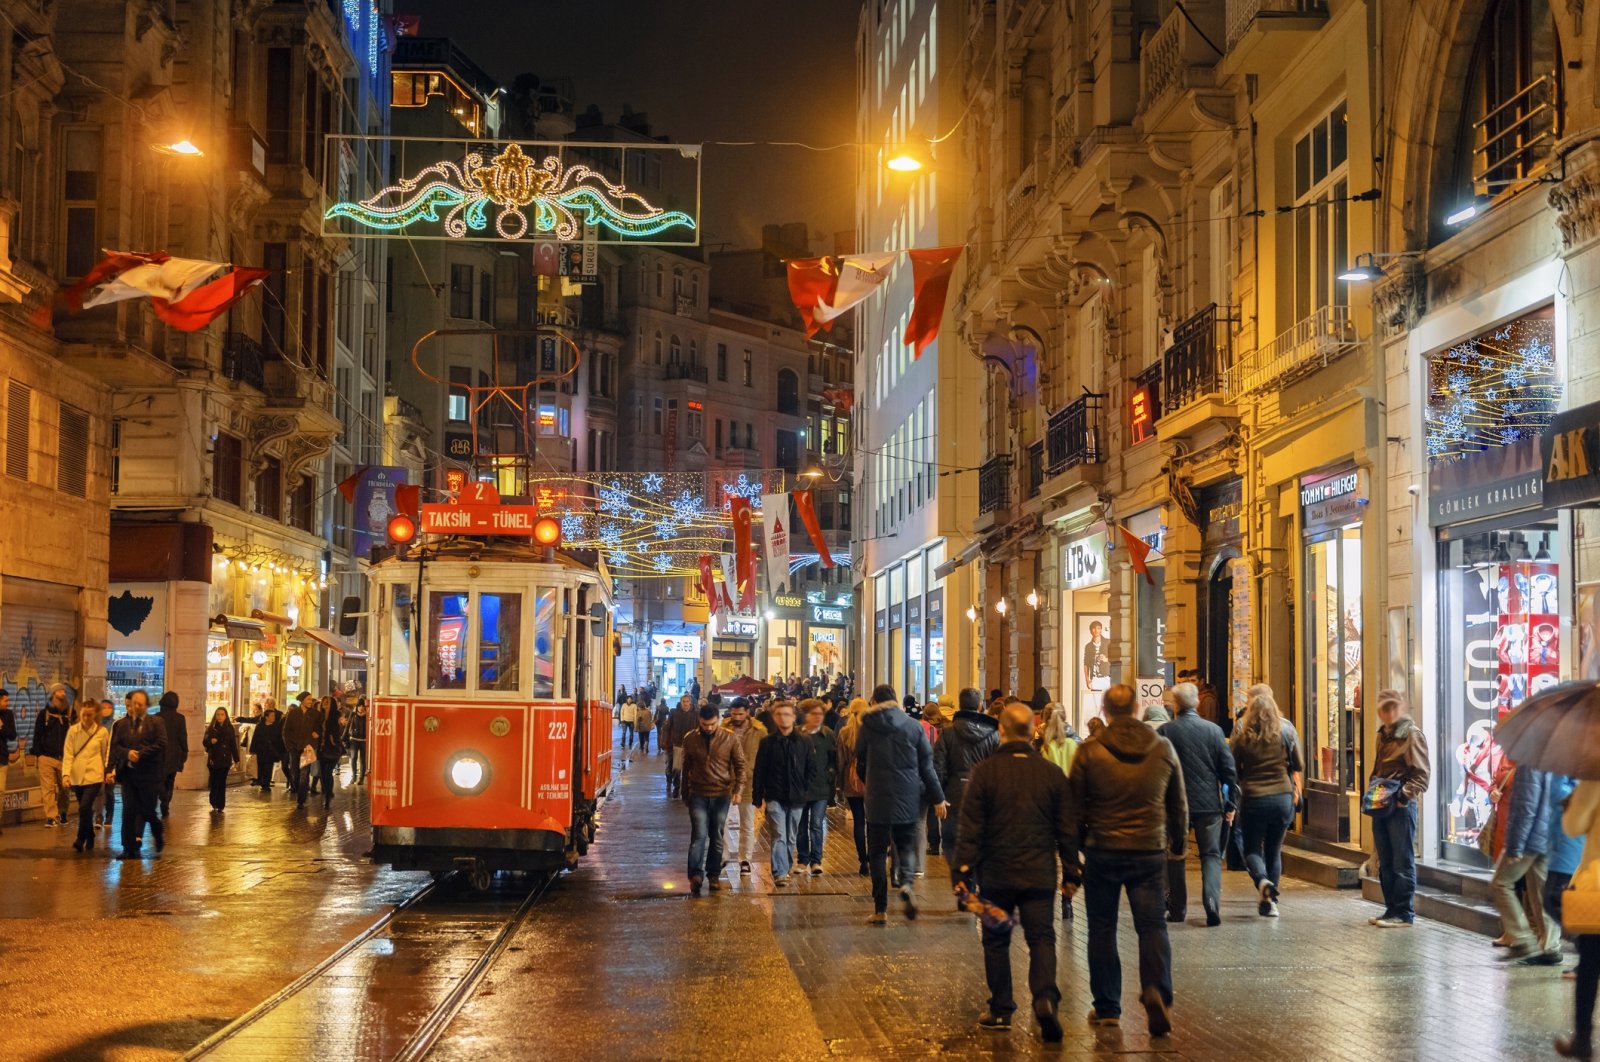 Taksim&#039;s famous İstiklal Street is illuminated with festive lights for the new year, Istanbul, Türkiye. (Getty Images)